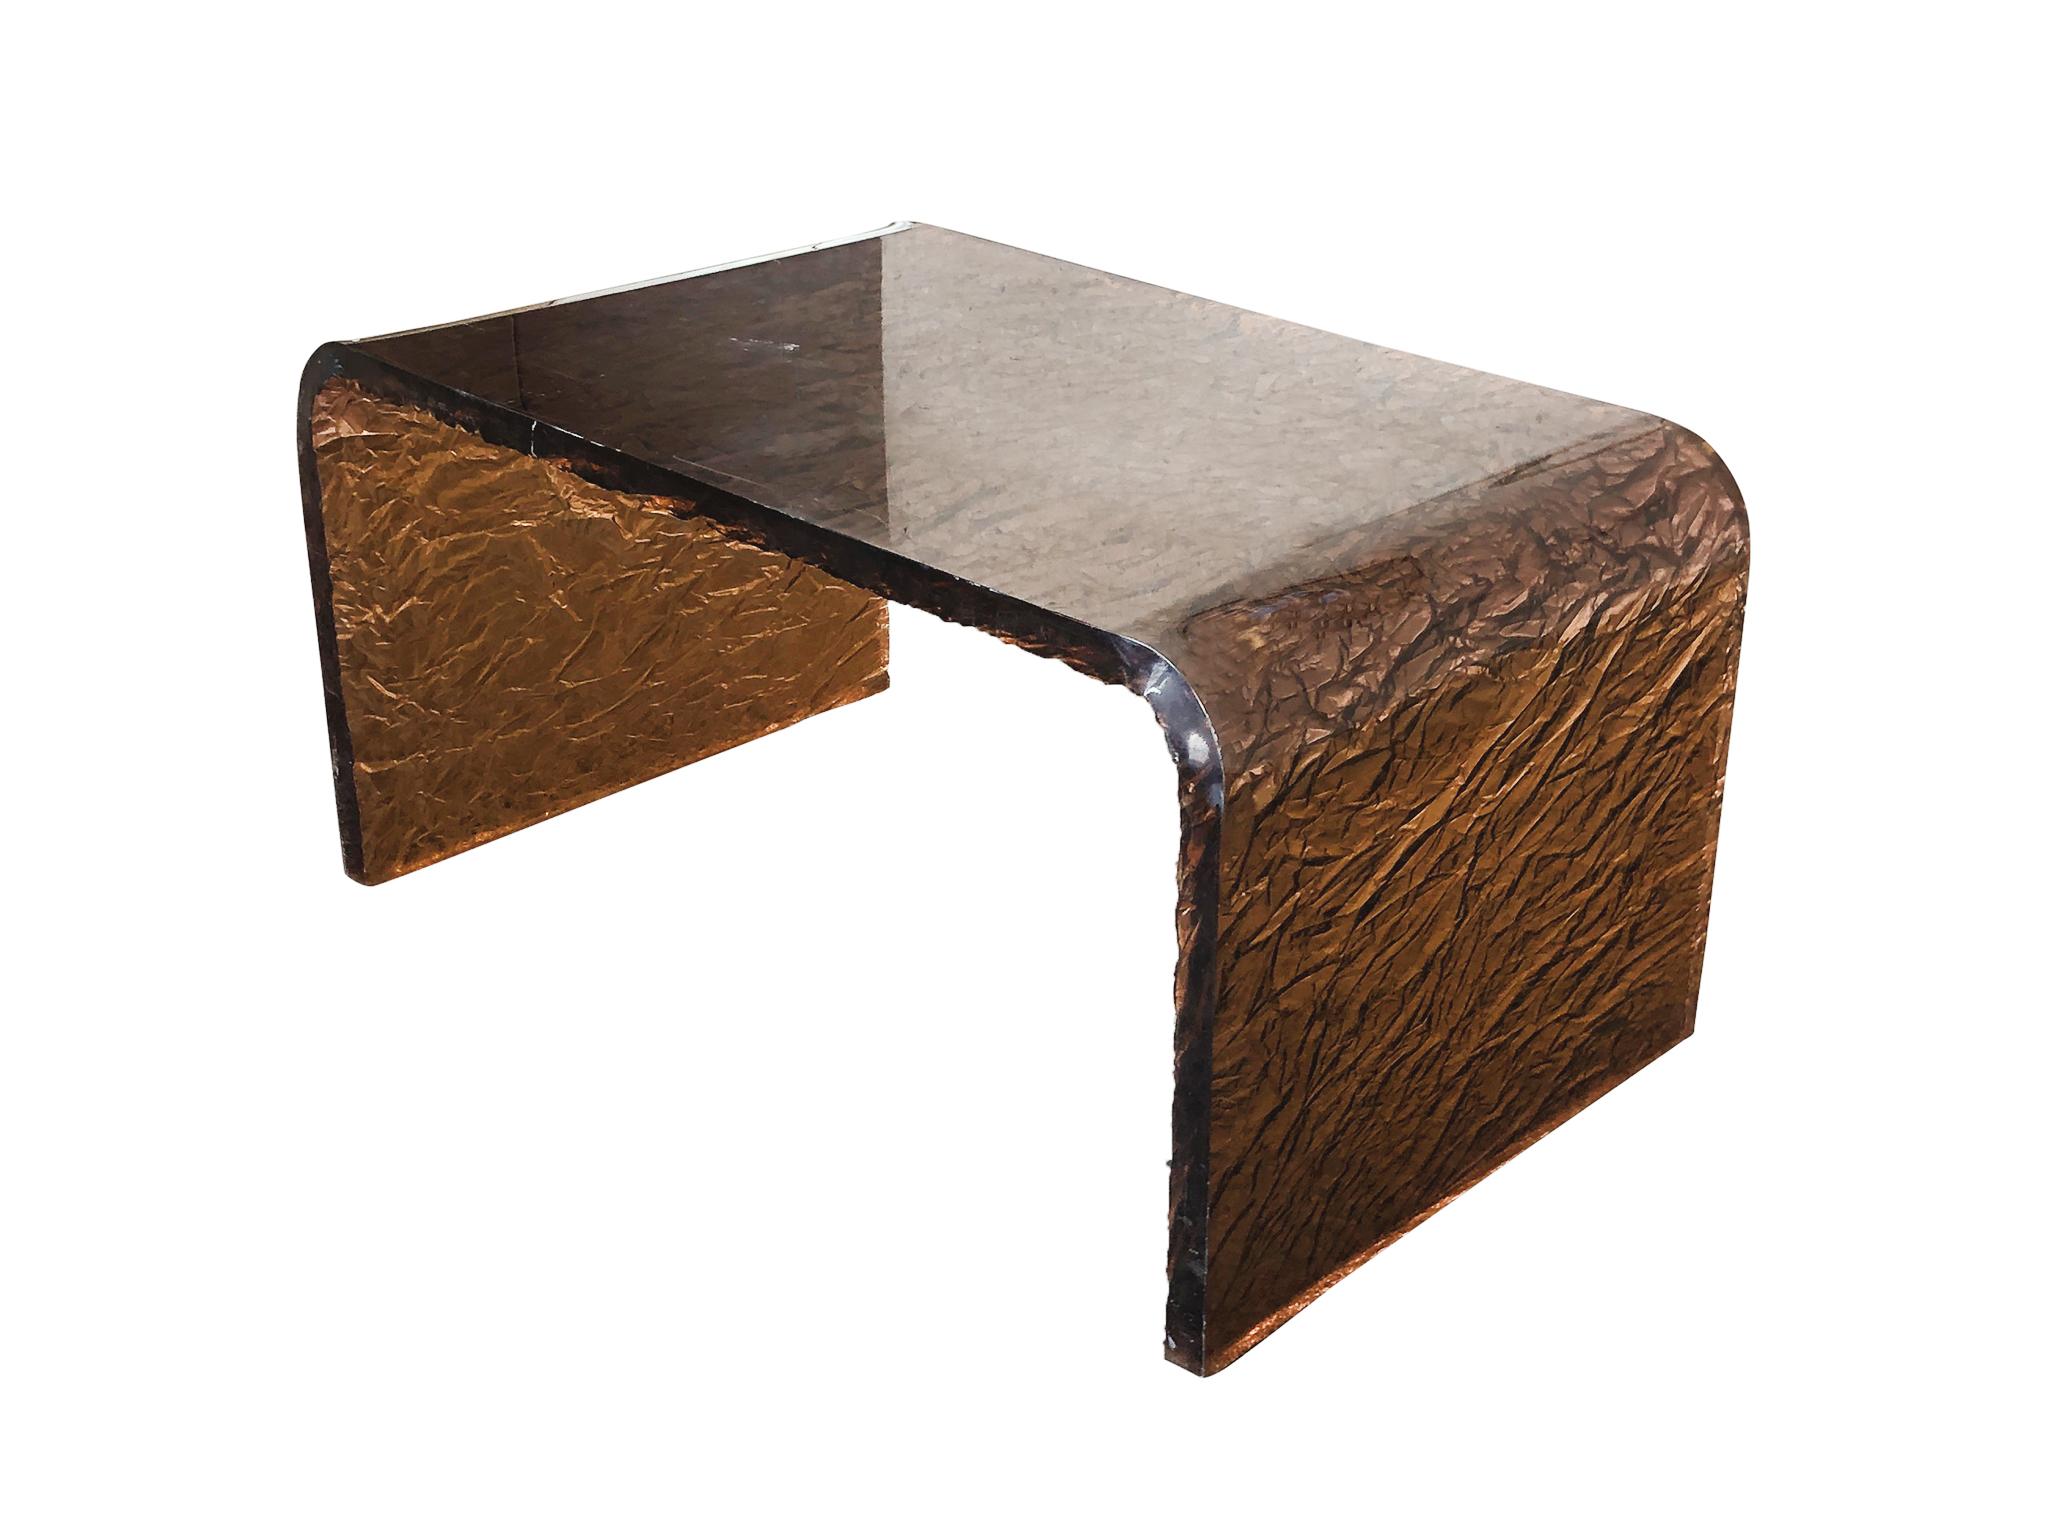 1970s-1980s Lucite side-table or small coffee table in the style of Karl Springer. We love this little table for its charm and beauty: its smooth waterfall structure, its translucent copper tone, and its textured underside that reminds us of